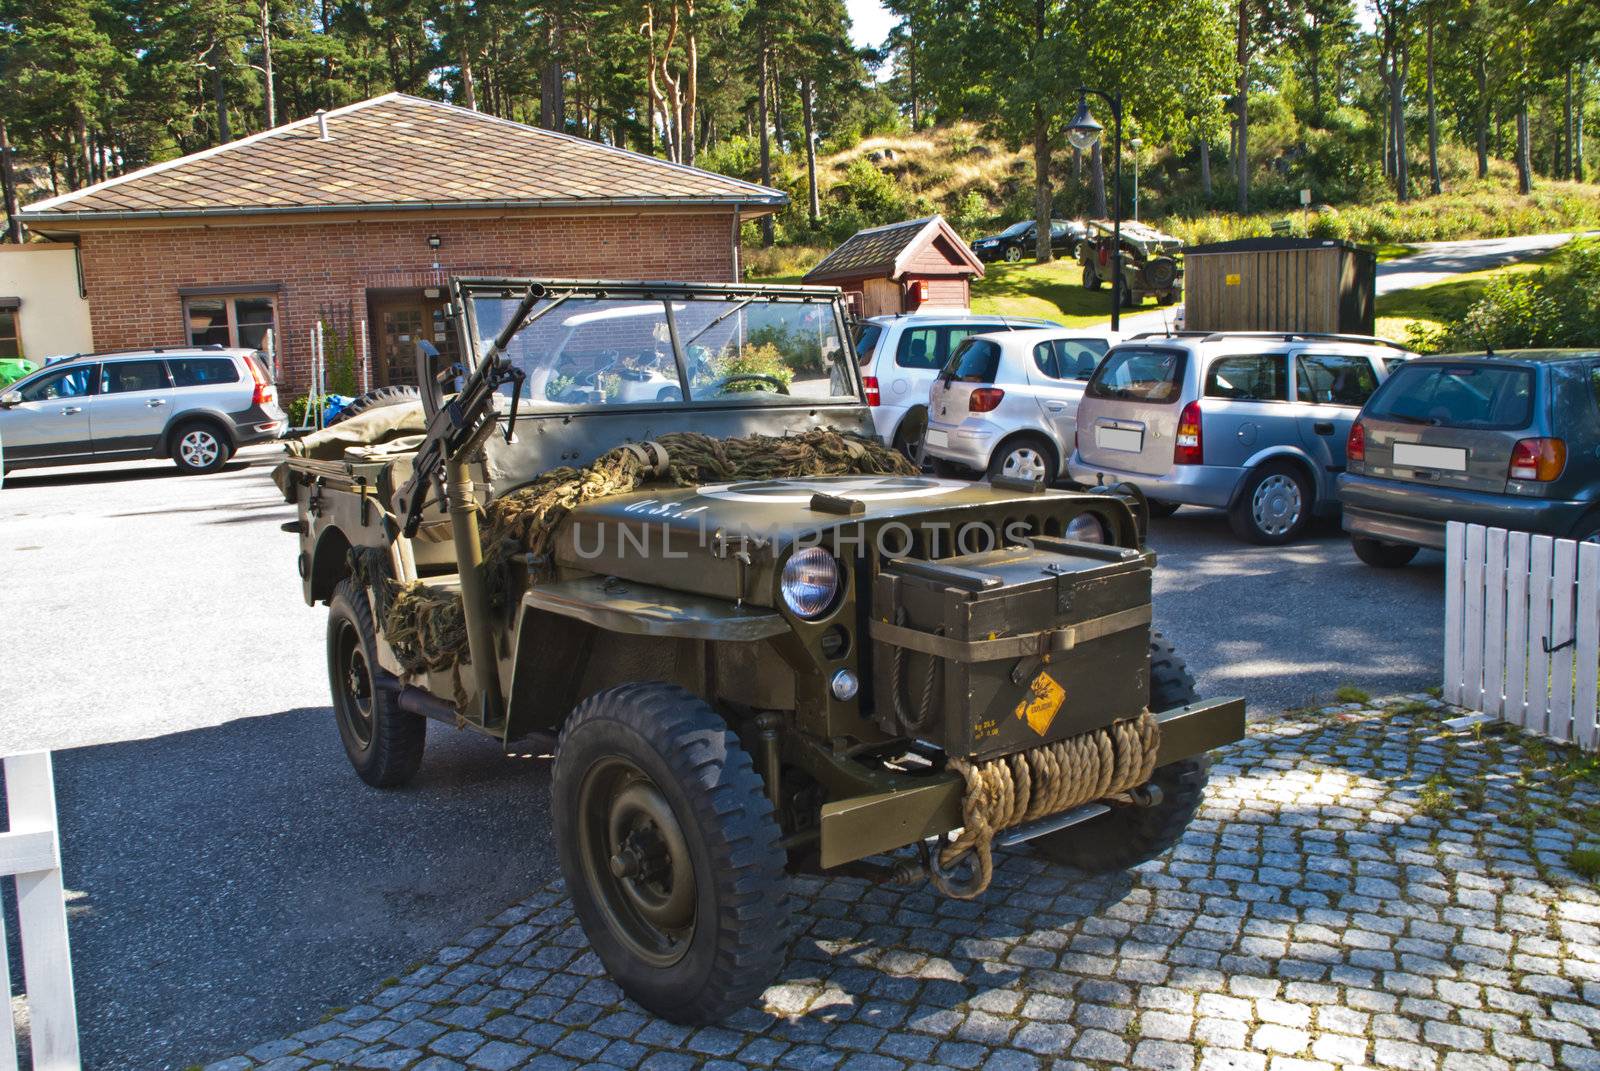 perhaps the most famous us army vehicle of wwII is the 1/4 ton 4 x 4 truck, it was nicknamed the "Jeep" after the early minneapolis-moline prime movers of the late 30's, many believe the name "Jeep" to be derived from the us army designation of the vehicle as general purpose or gp, the usage of "Jeep" predates the introduction of the well know 4 x 4, image is shot at fredriksten fortress in halden